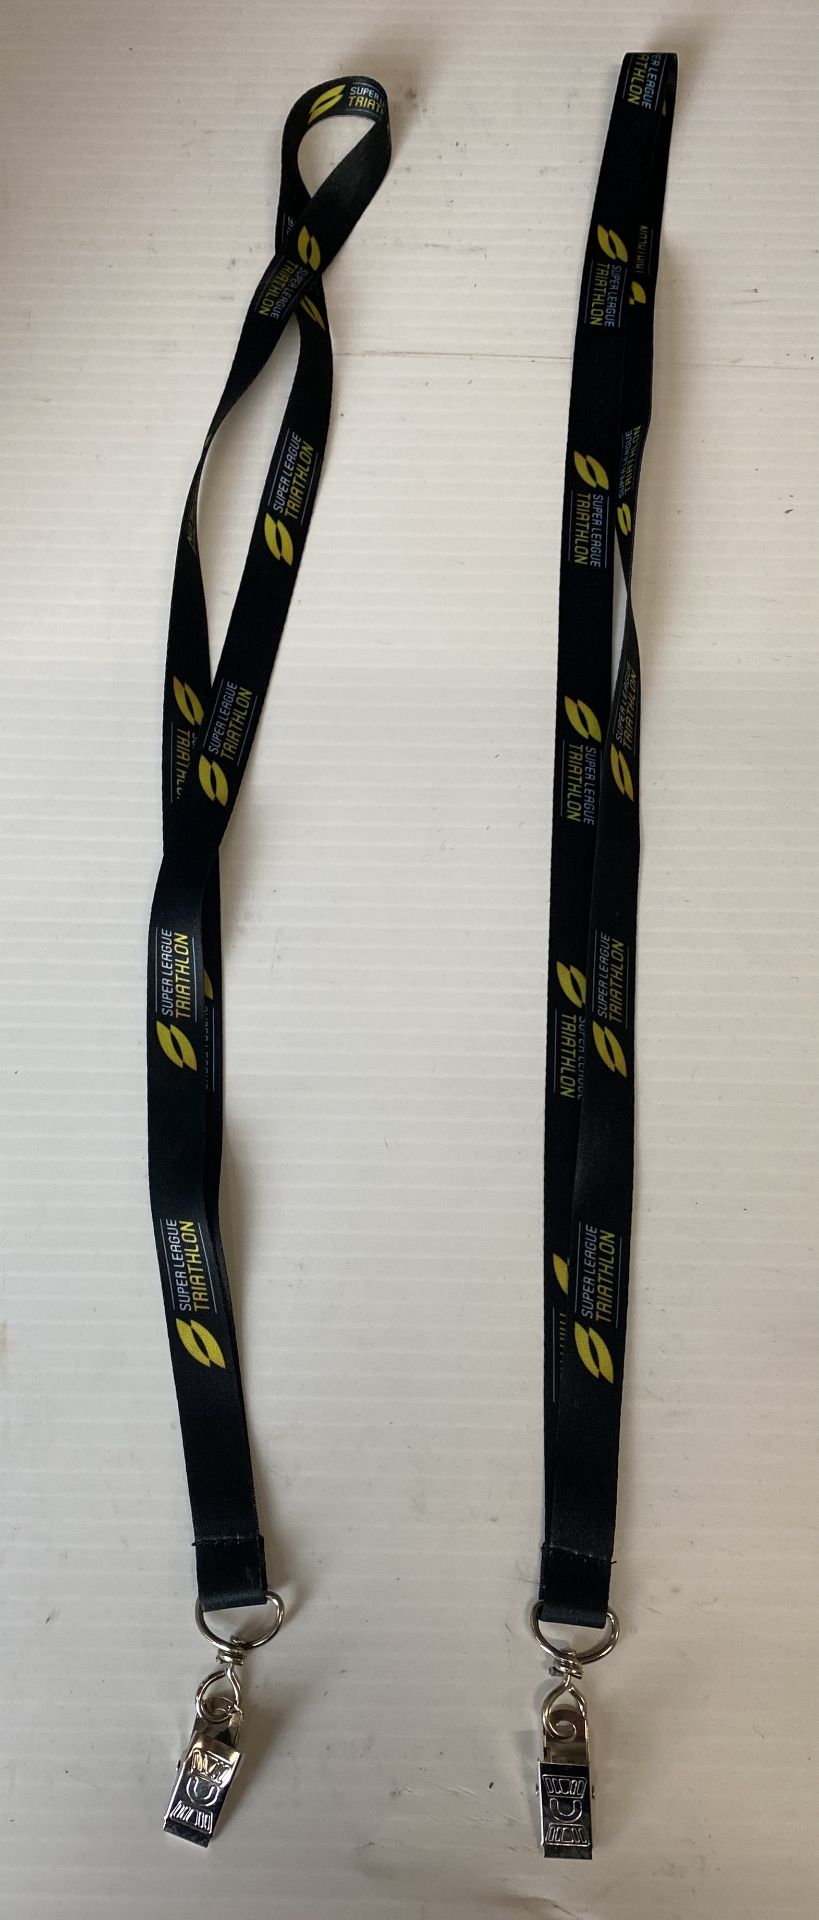 Contents to box - Large quantity of Super League Triathlon and plain black Lanyards - Image 2 of 2